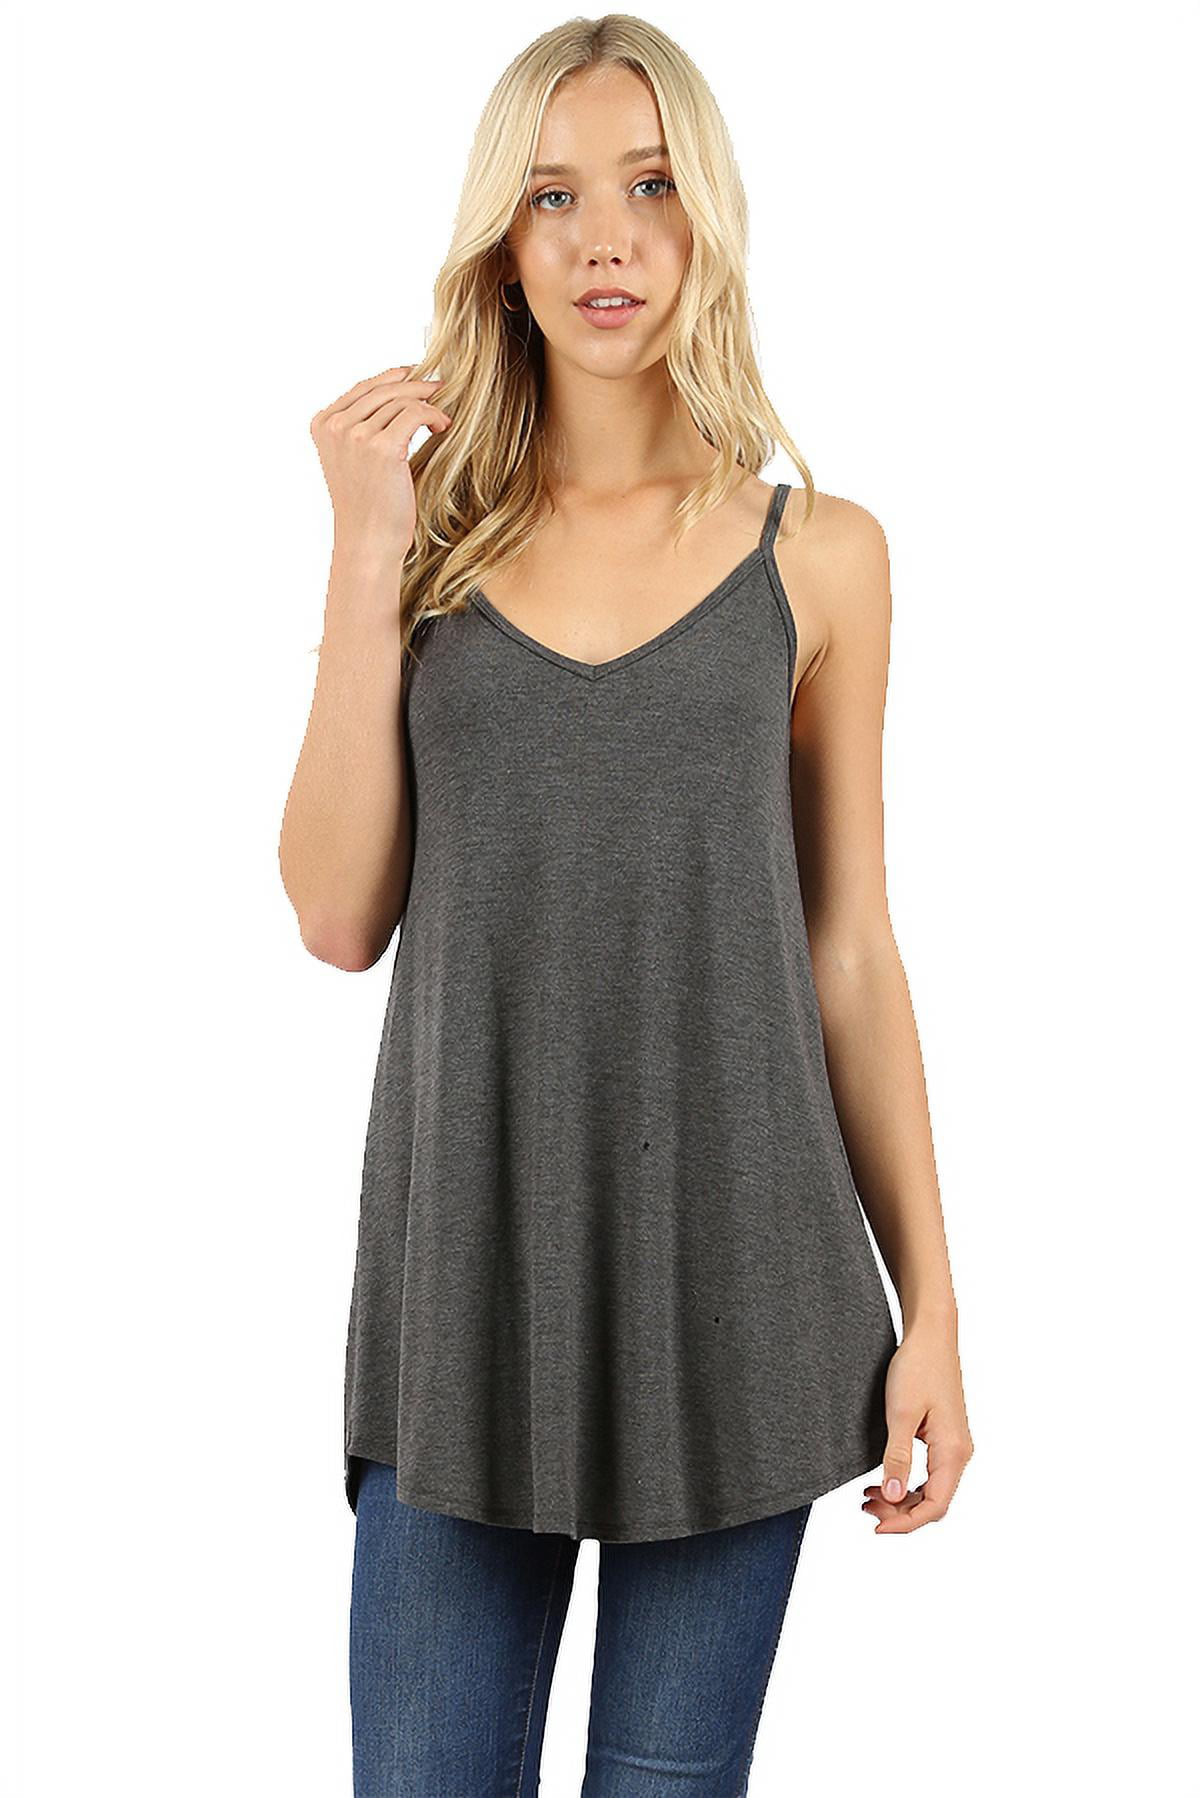 Front and Back Reversible Neckline Two Way Cami Tank - Walmart.com